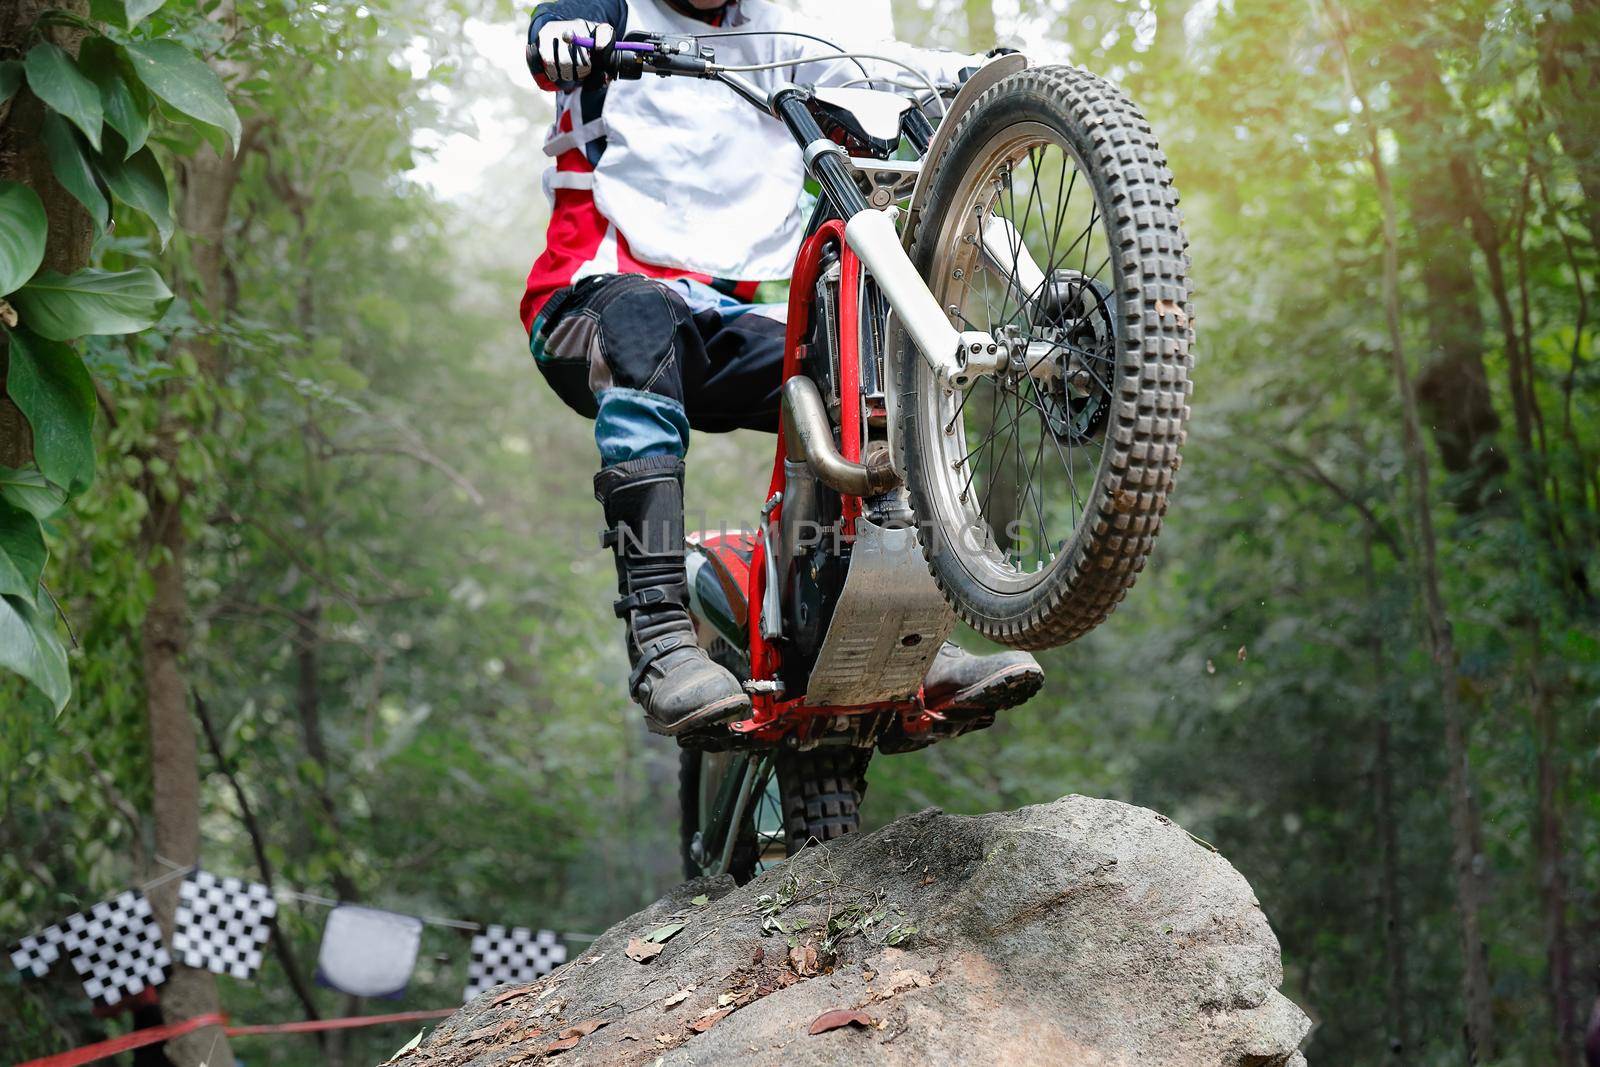 Trials motorcycle is jumping over rocks by toa55